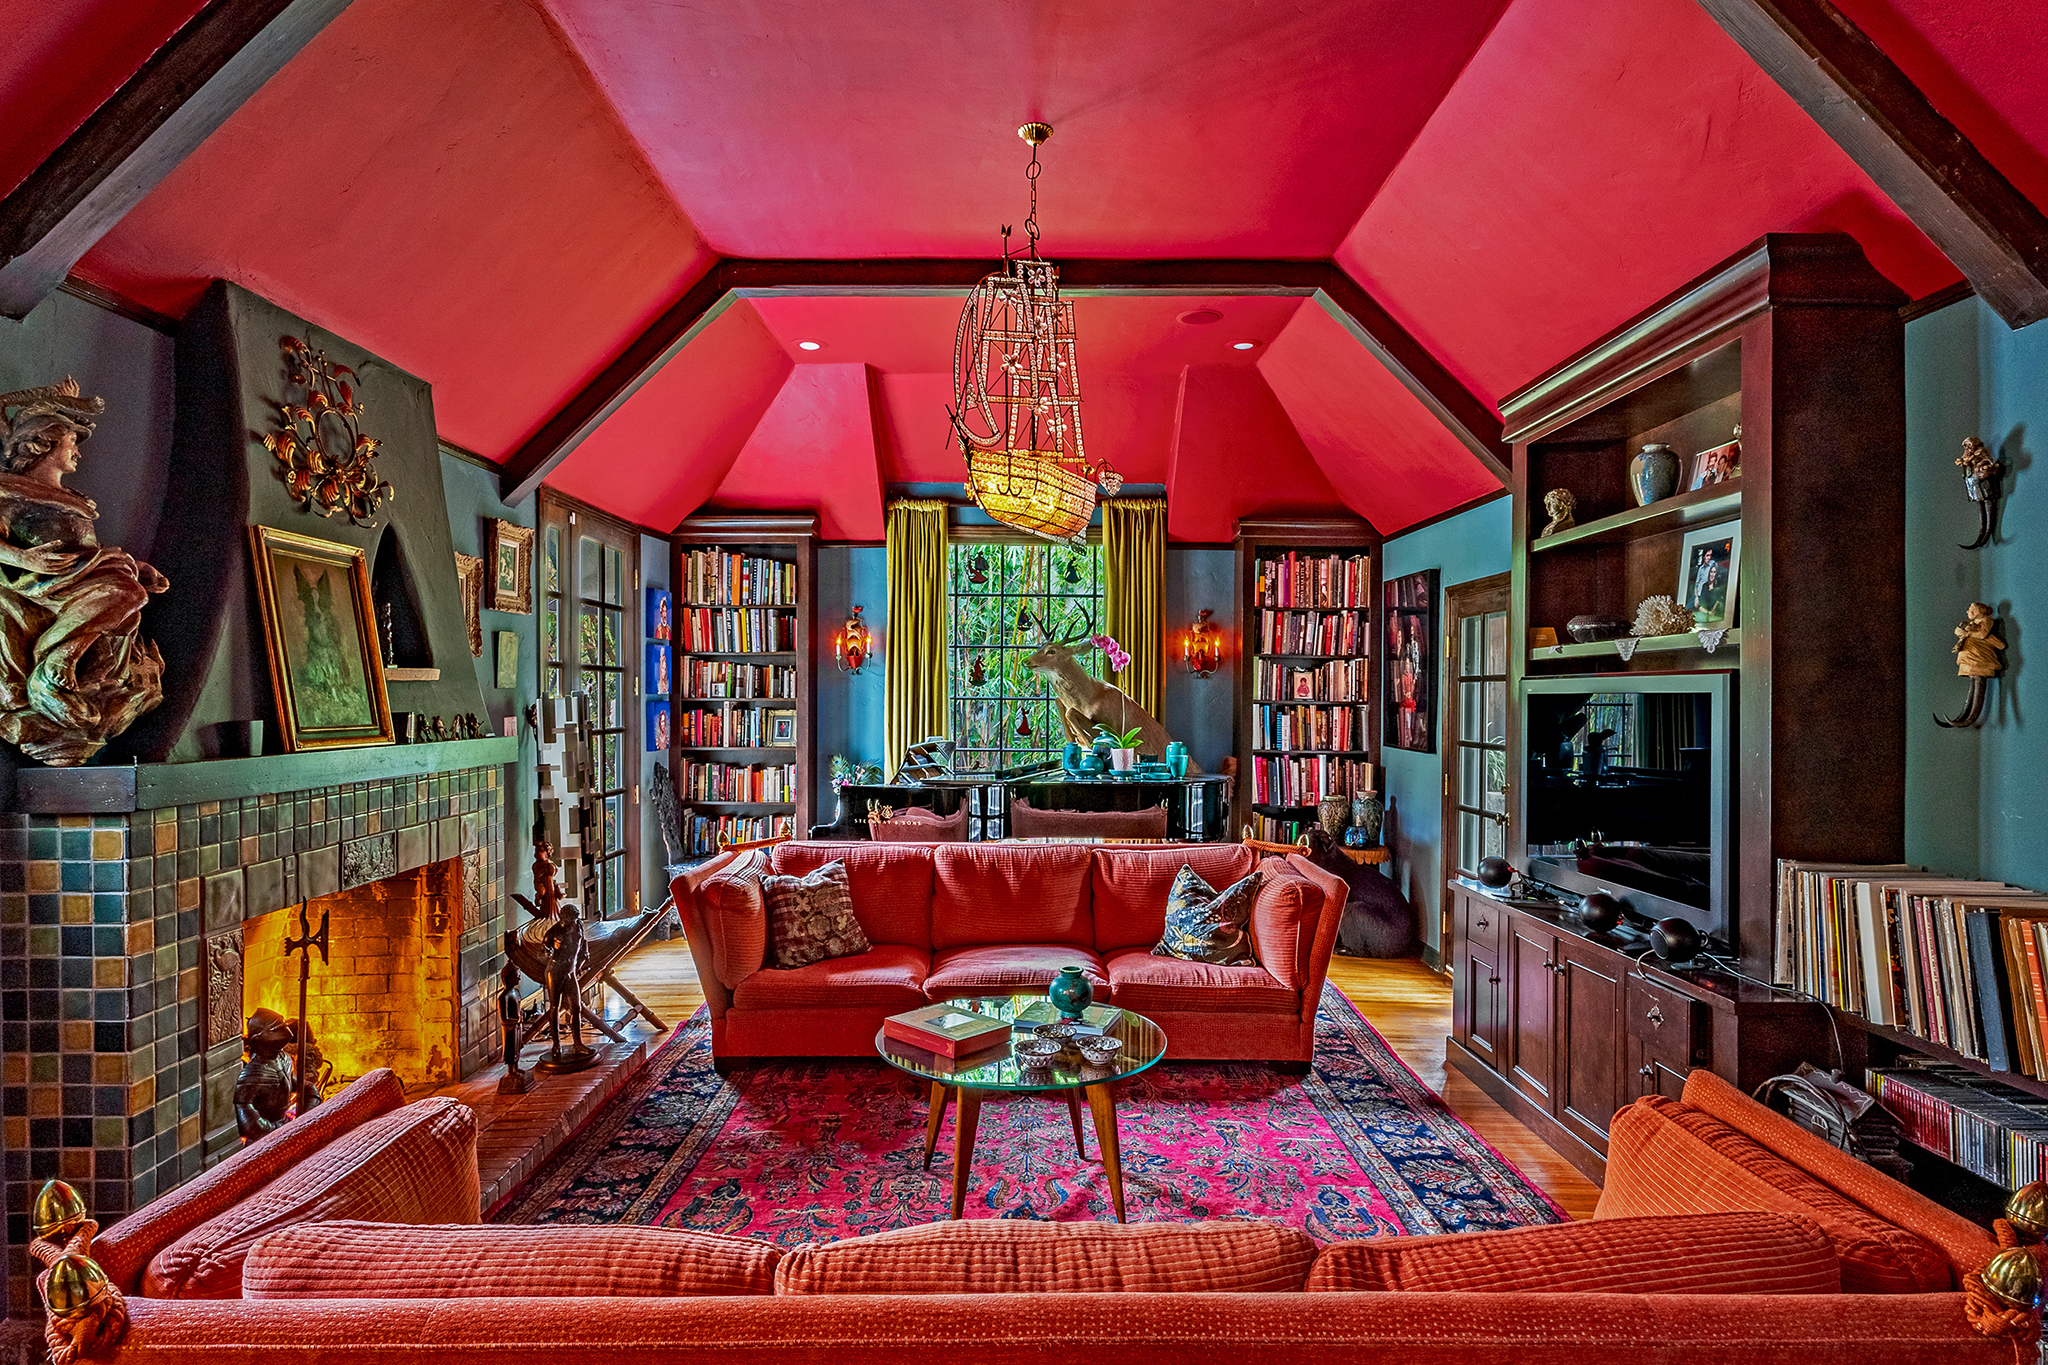 A glimpse into Rufus Wainwright's whimsical Hollywood Hills home